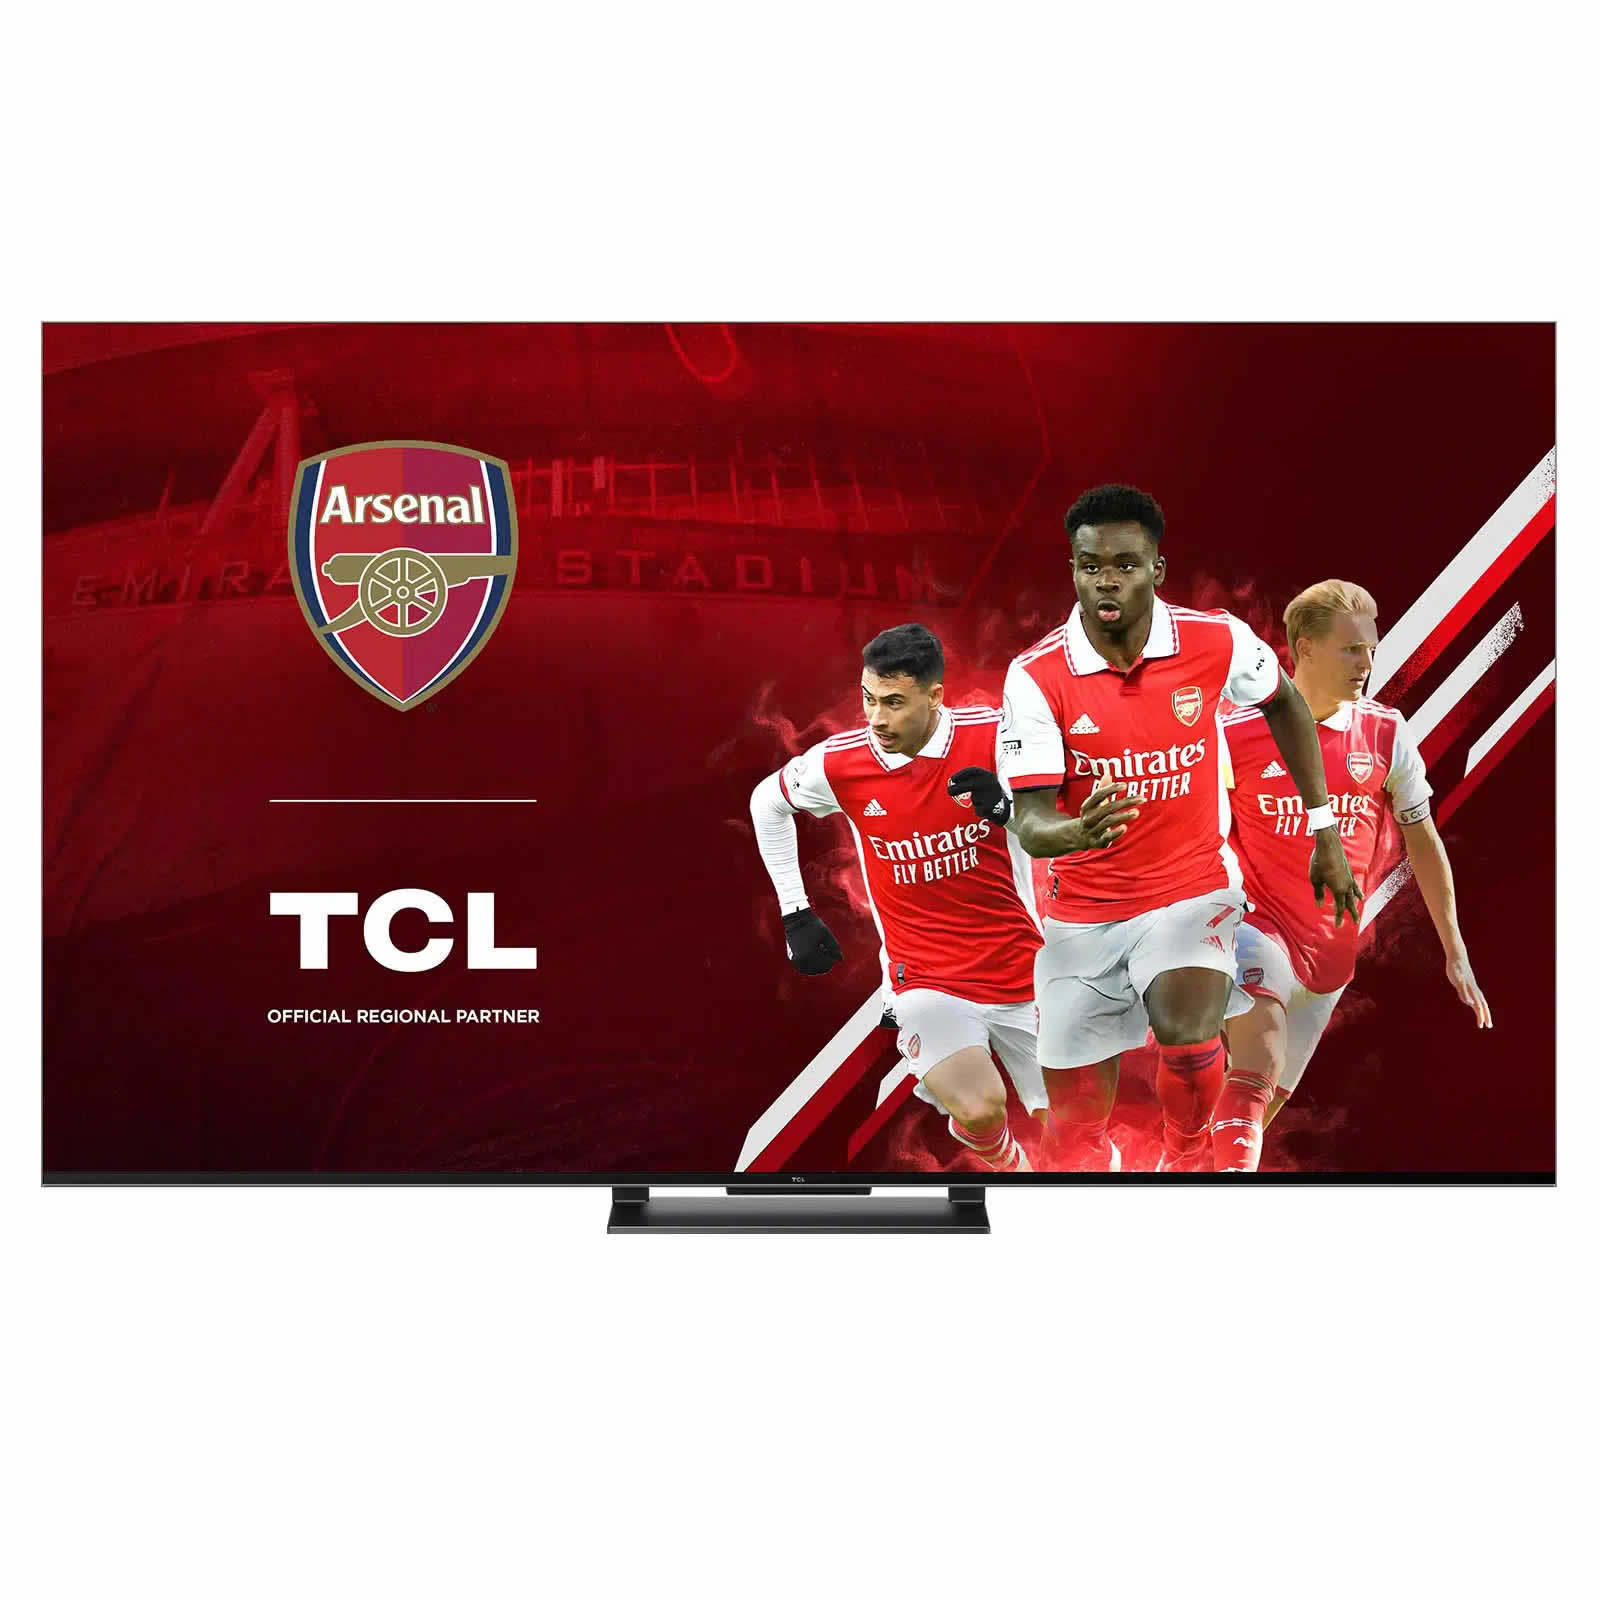 TCL 55inch 4K QLED SMART TV WiFi Freeview HD Google